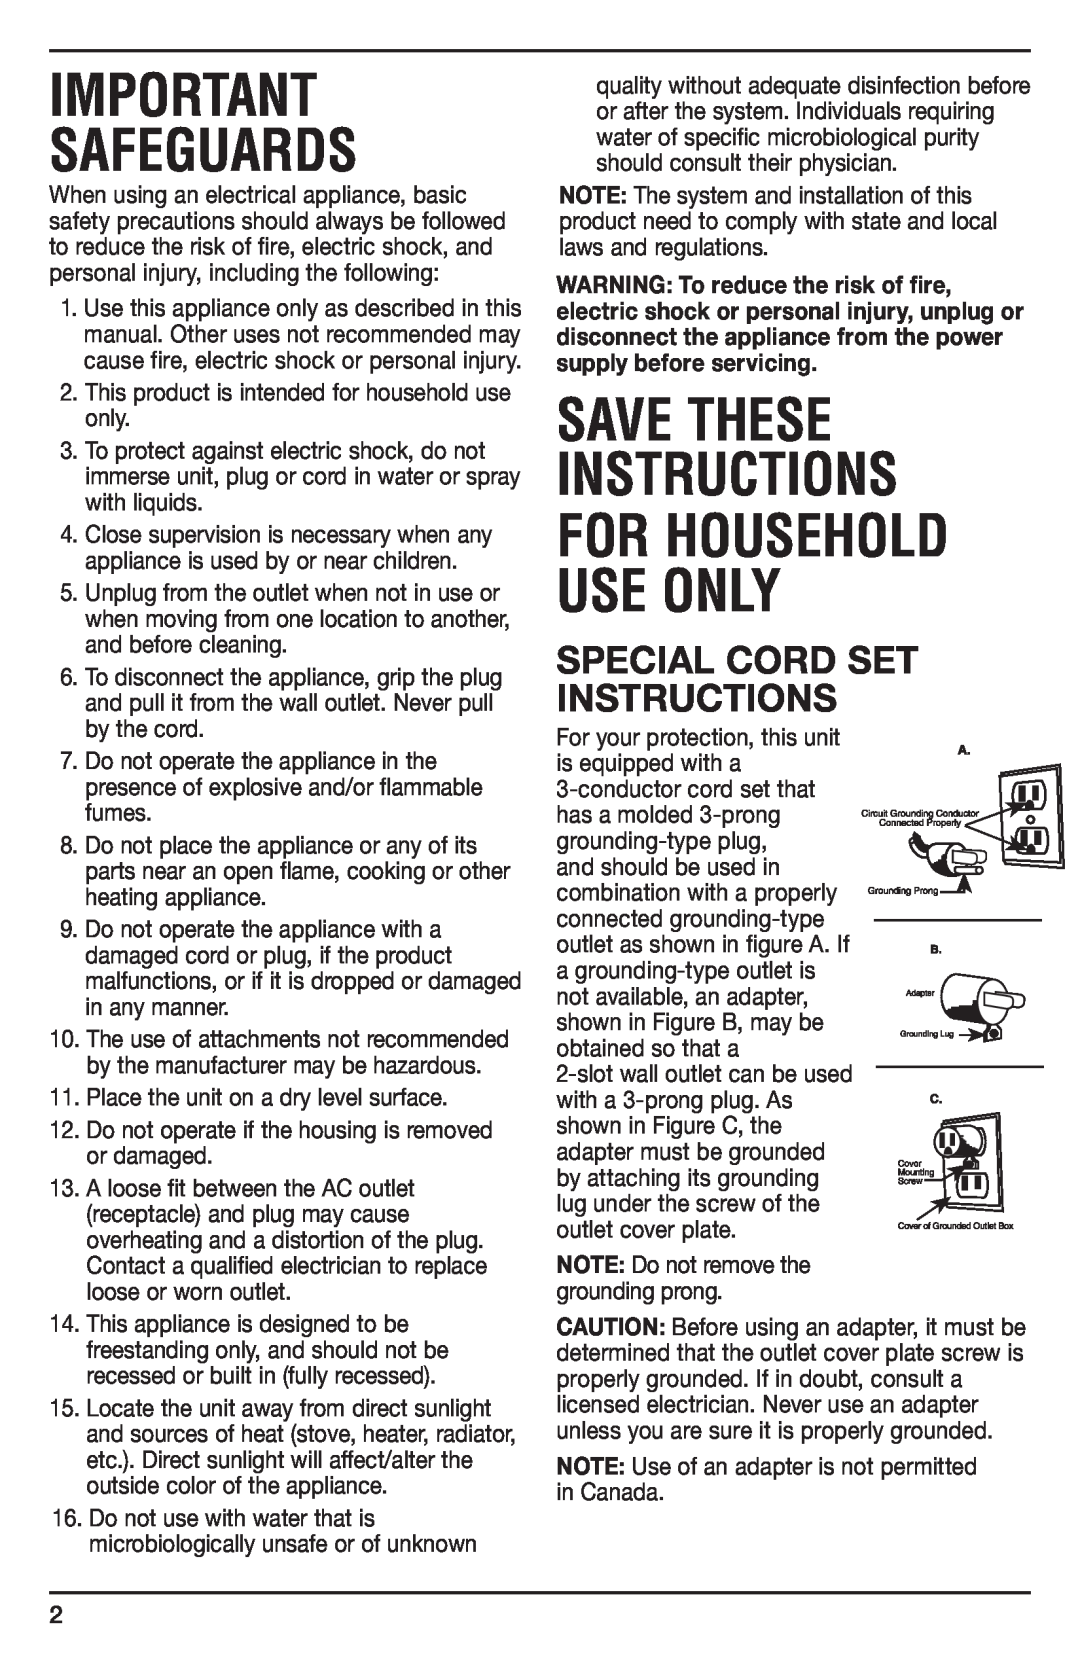 Cuisinart WCH-1500, IB-8896B Special Cord Set Instructions, Safeguards, Save These Instructions For Household Use Only 